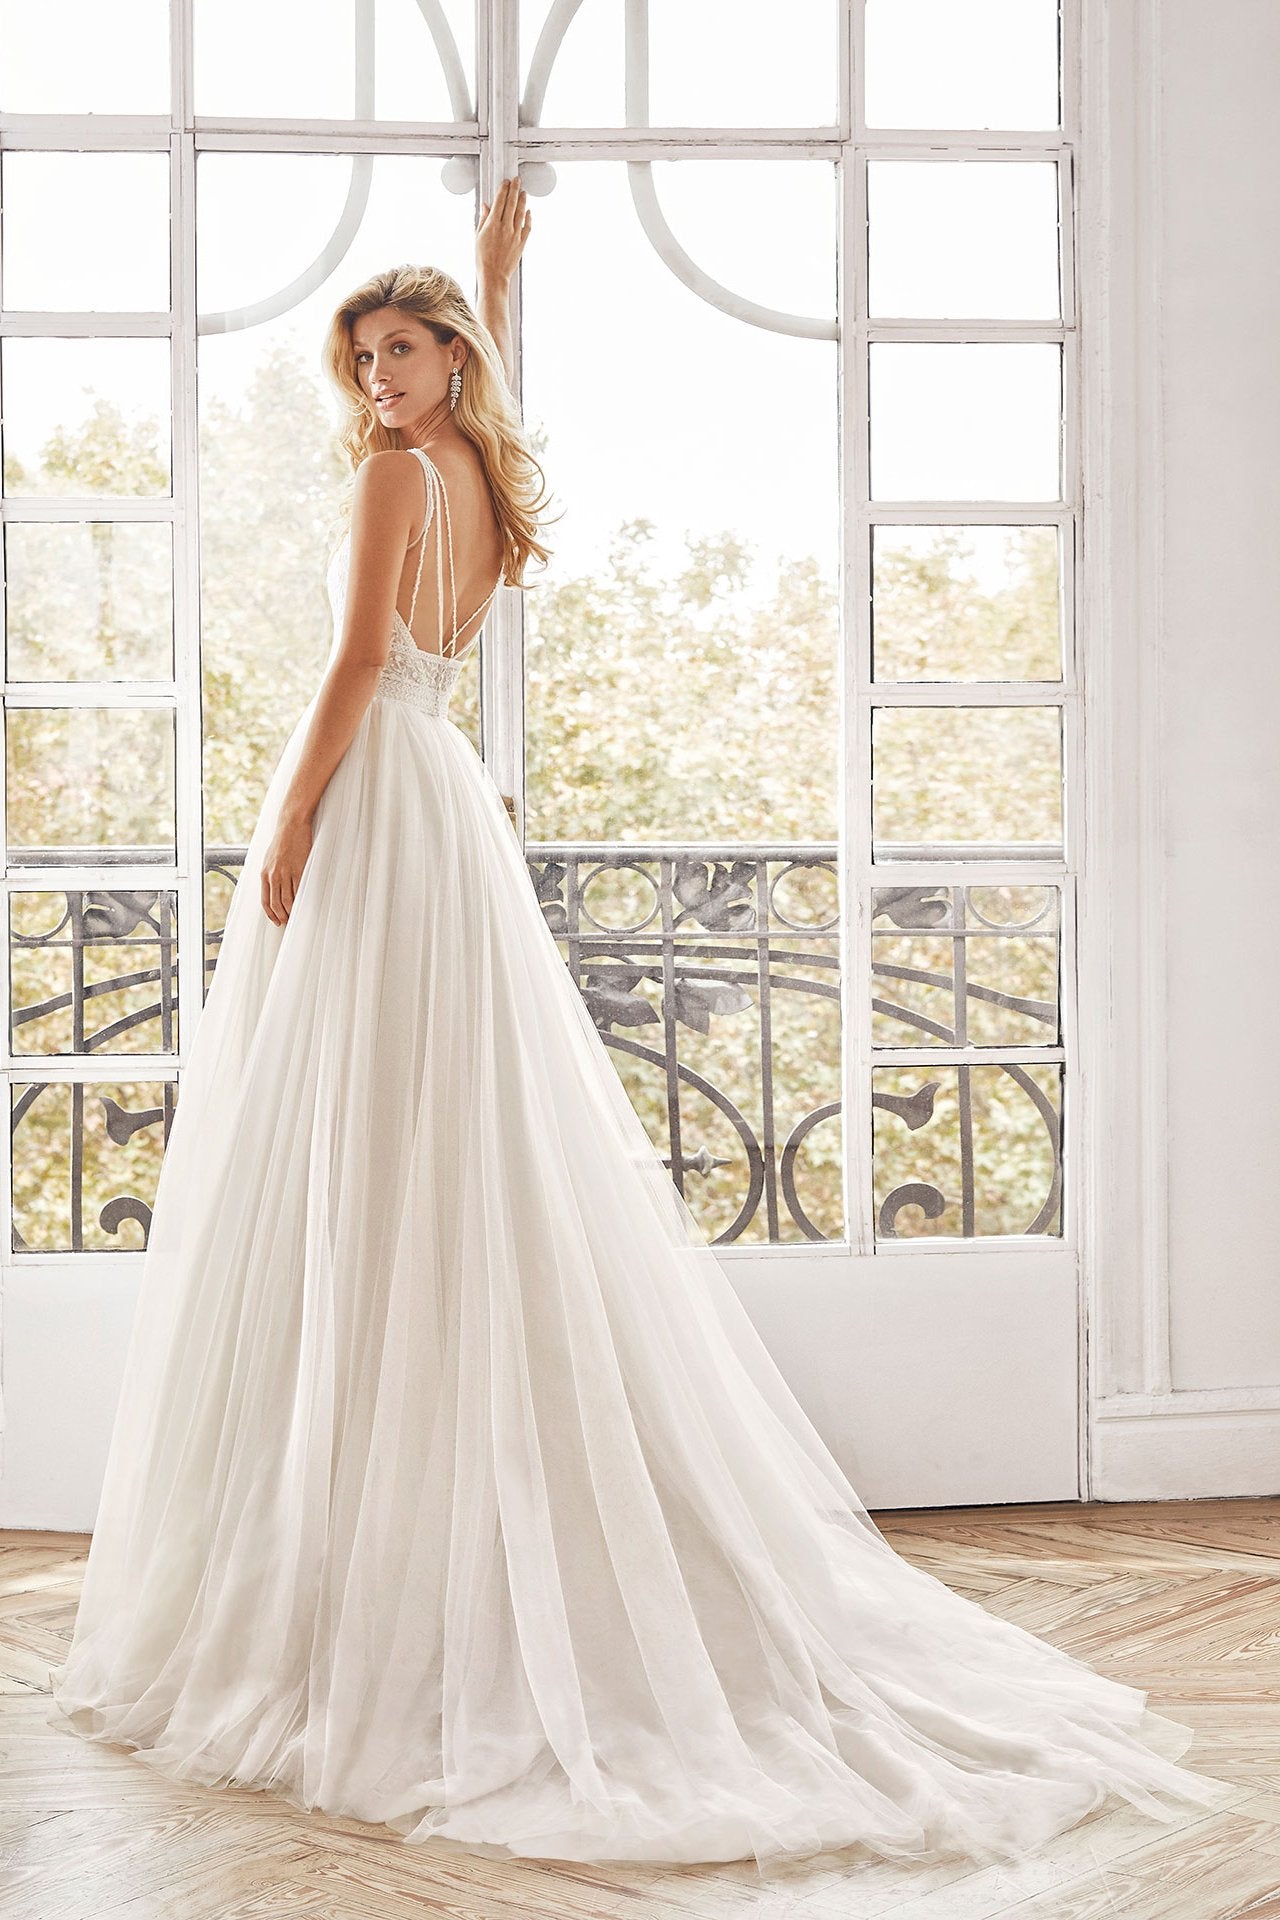 Nore - Sample Gown, Online Sample Sale, Aire Barcelona - Sample Gown - Eternal Bridal